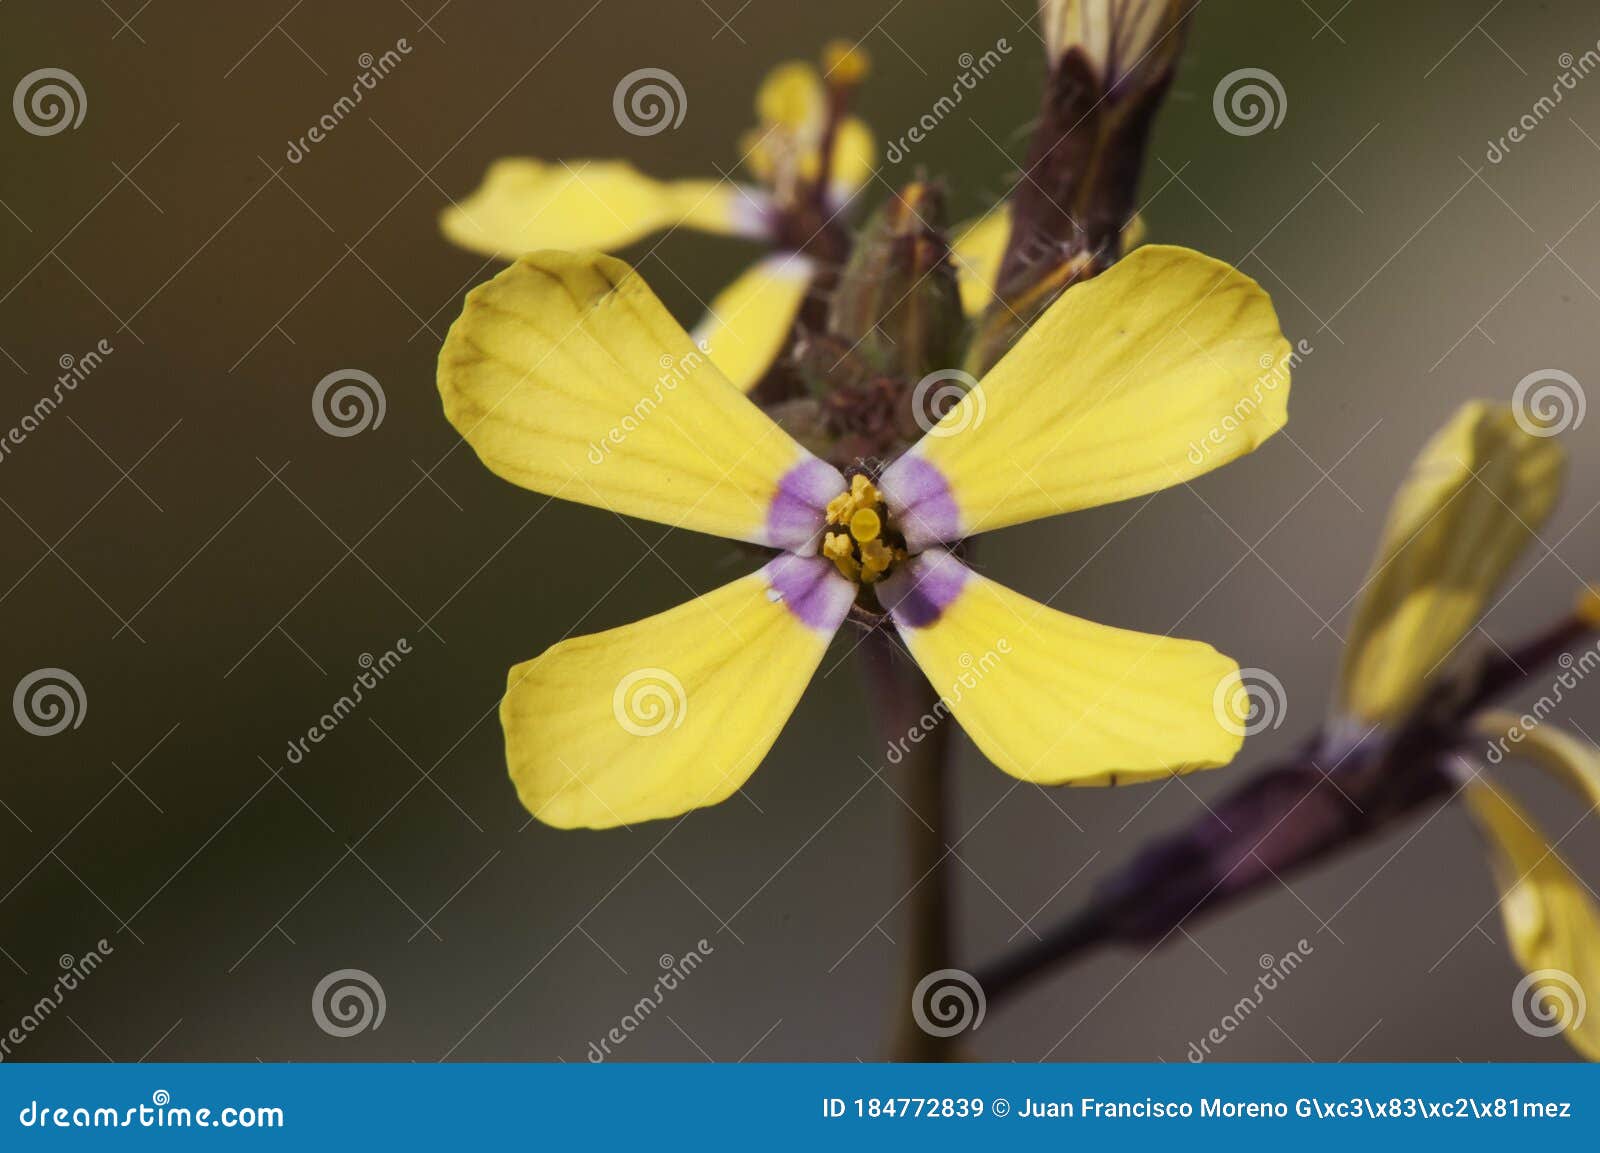 coyncia transtagana small and beautiful yellow flower with the pink center of the cruciferae family endemic to the southwest of